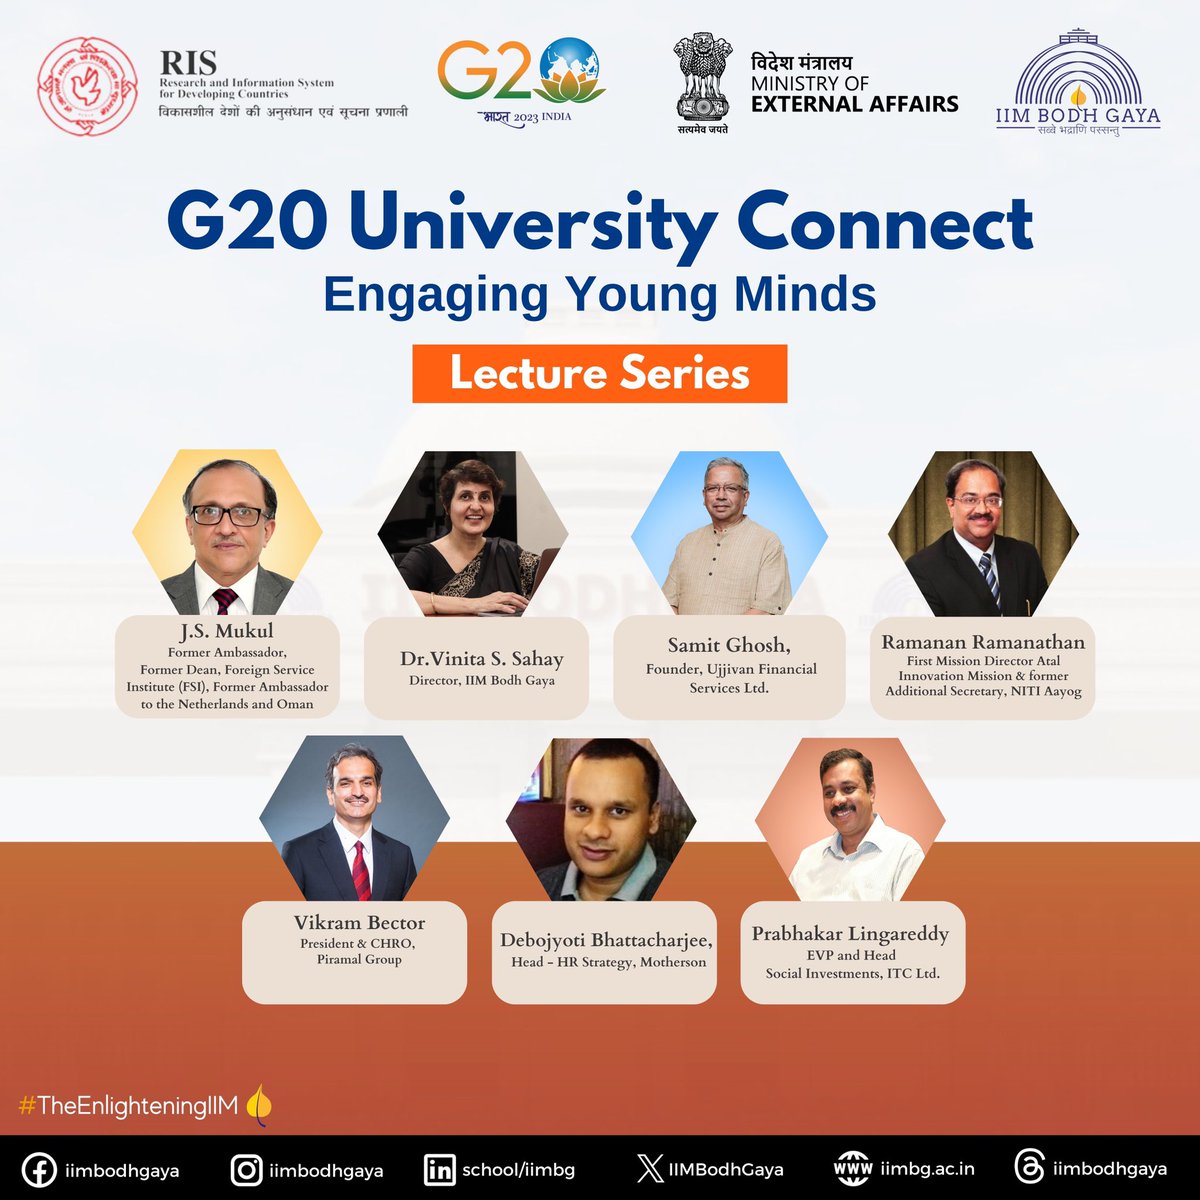 IIM Bodh Gaya is privileged and excited to host a board of eminent leaders across domains in the G20 University Connect.

#G20 #Universityconnect